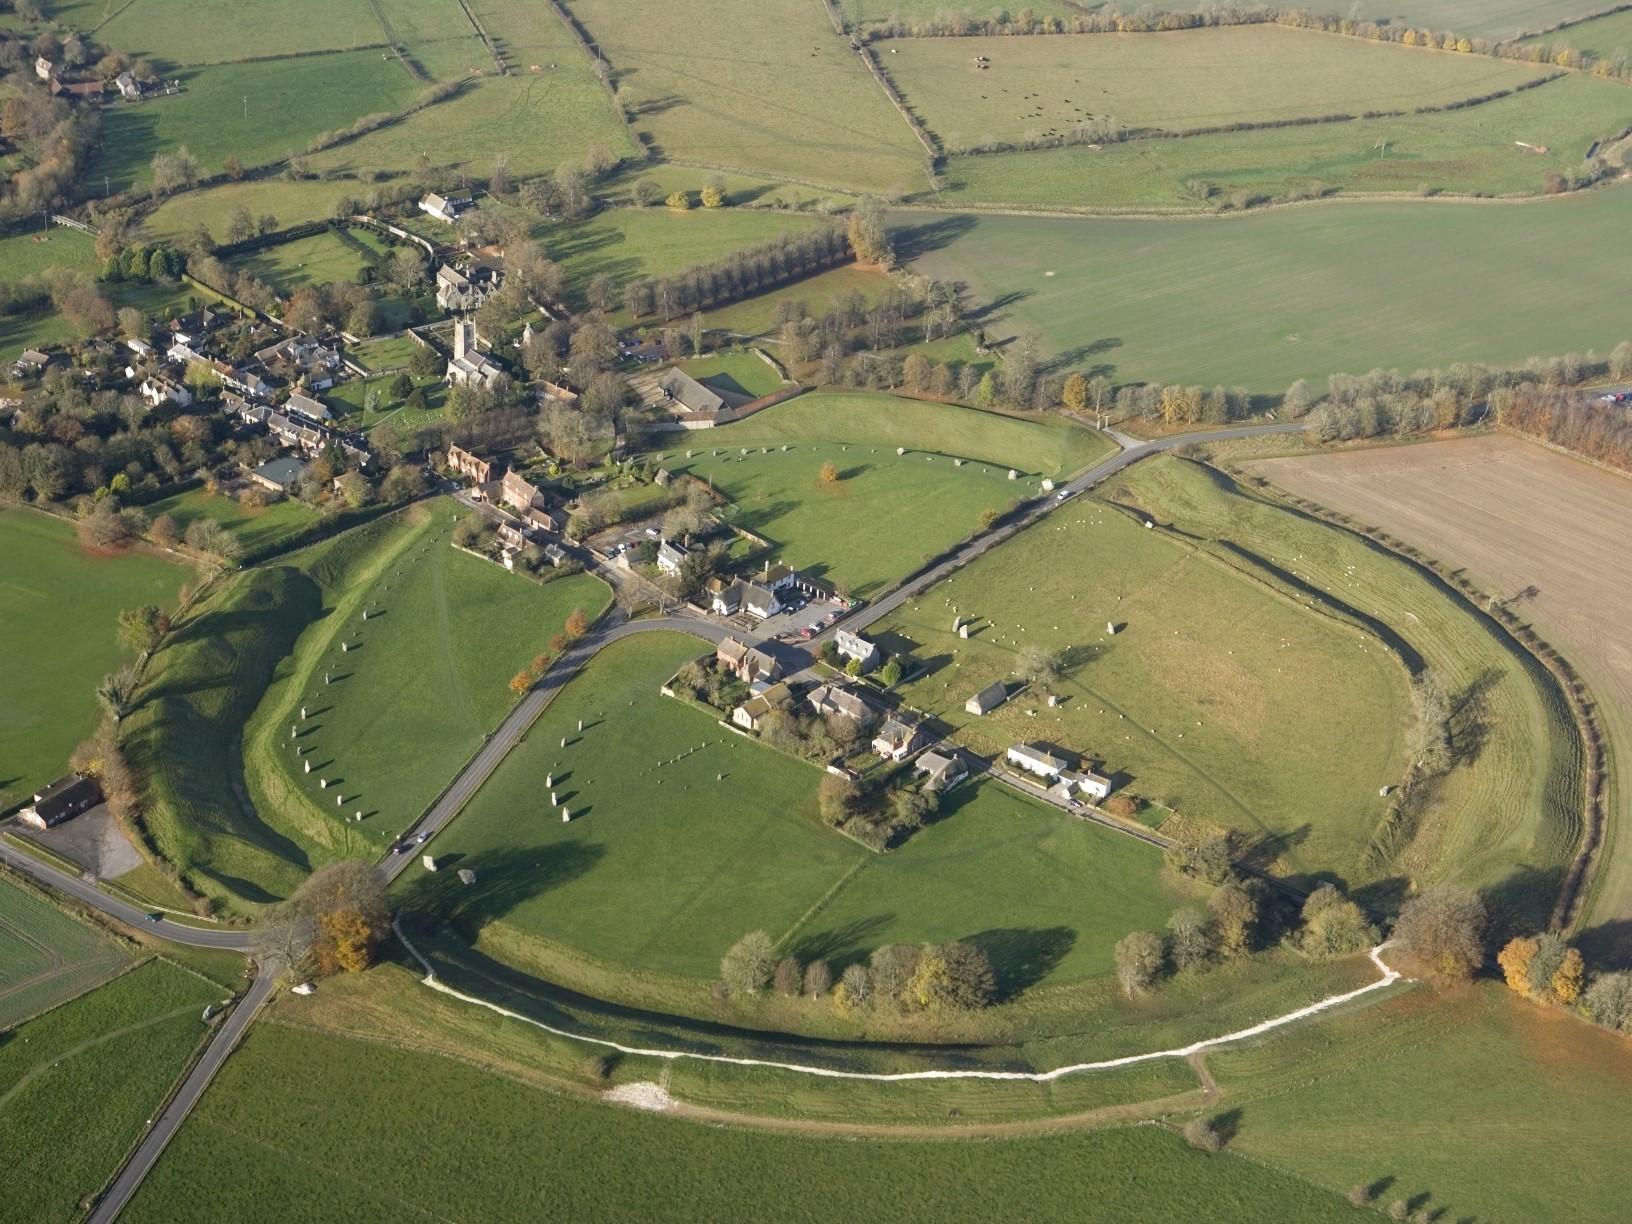 It is likely that the creation of Avebury changed eating traditions